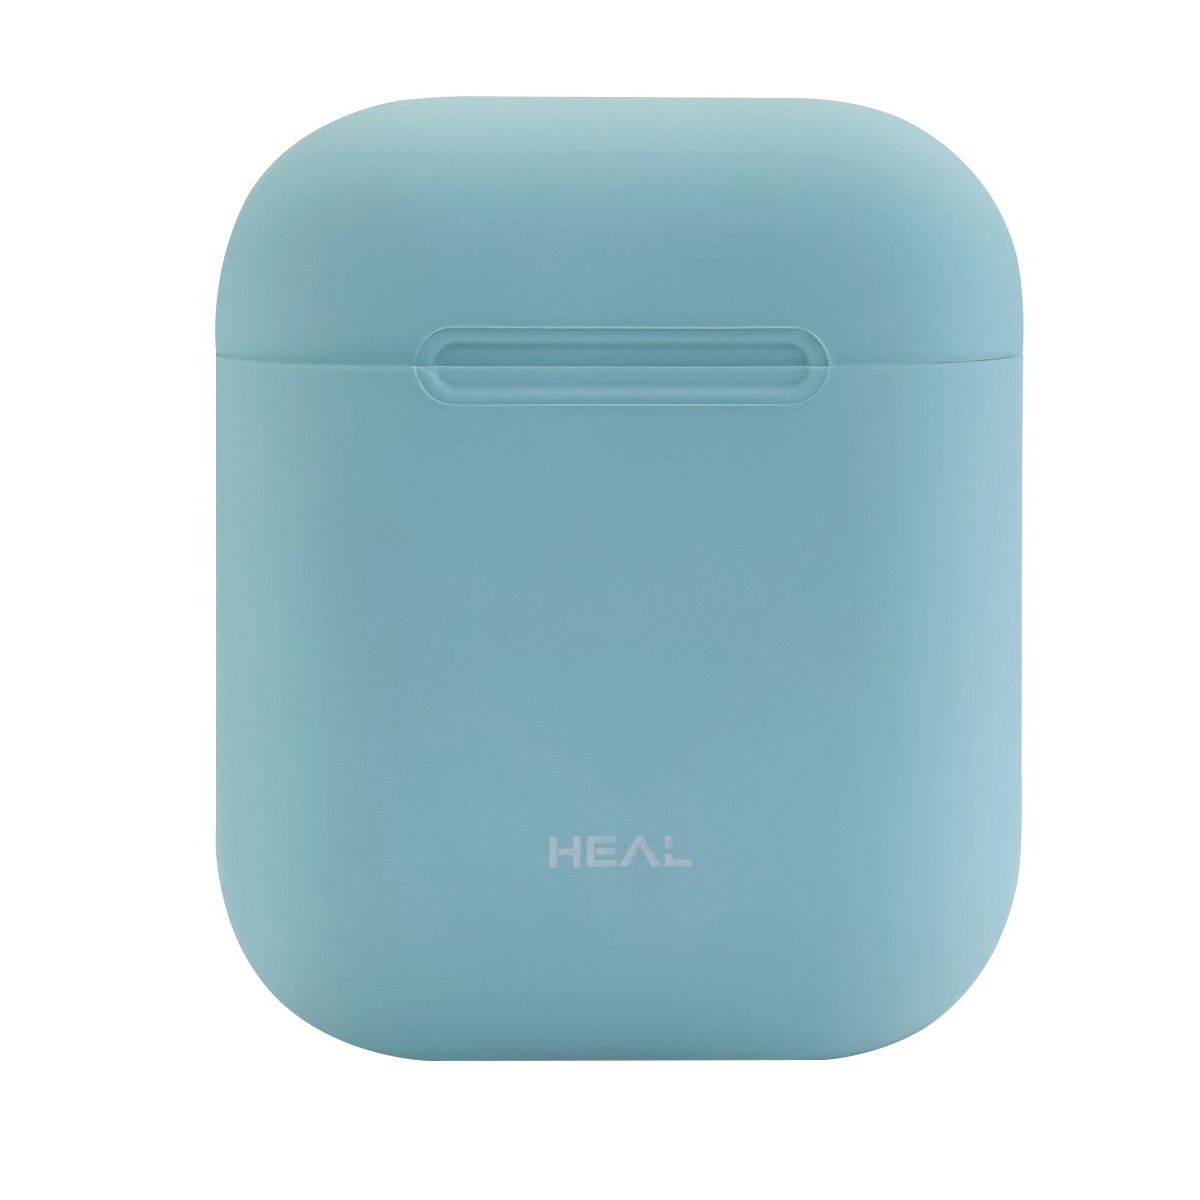 Silicone case from Heal for use with AirPods 1/2